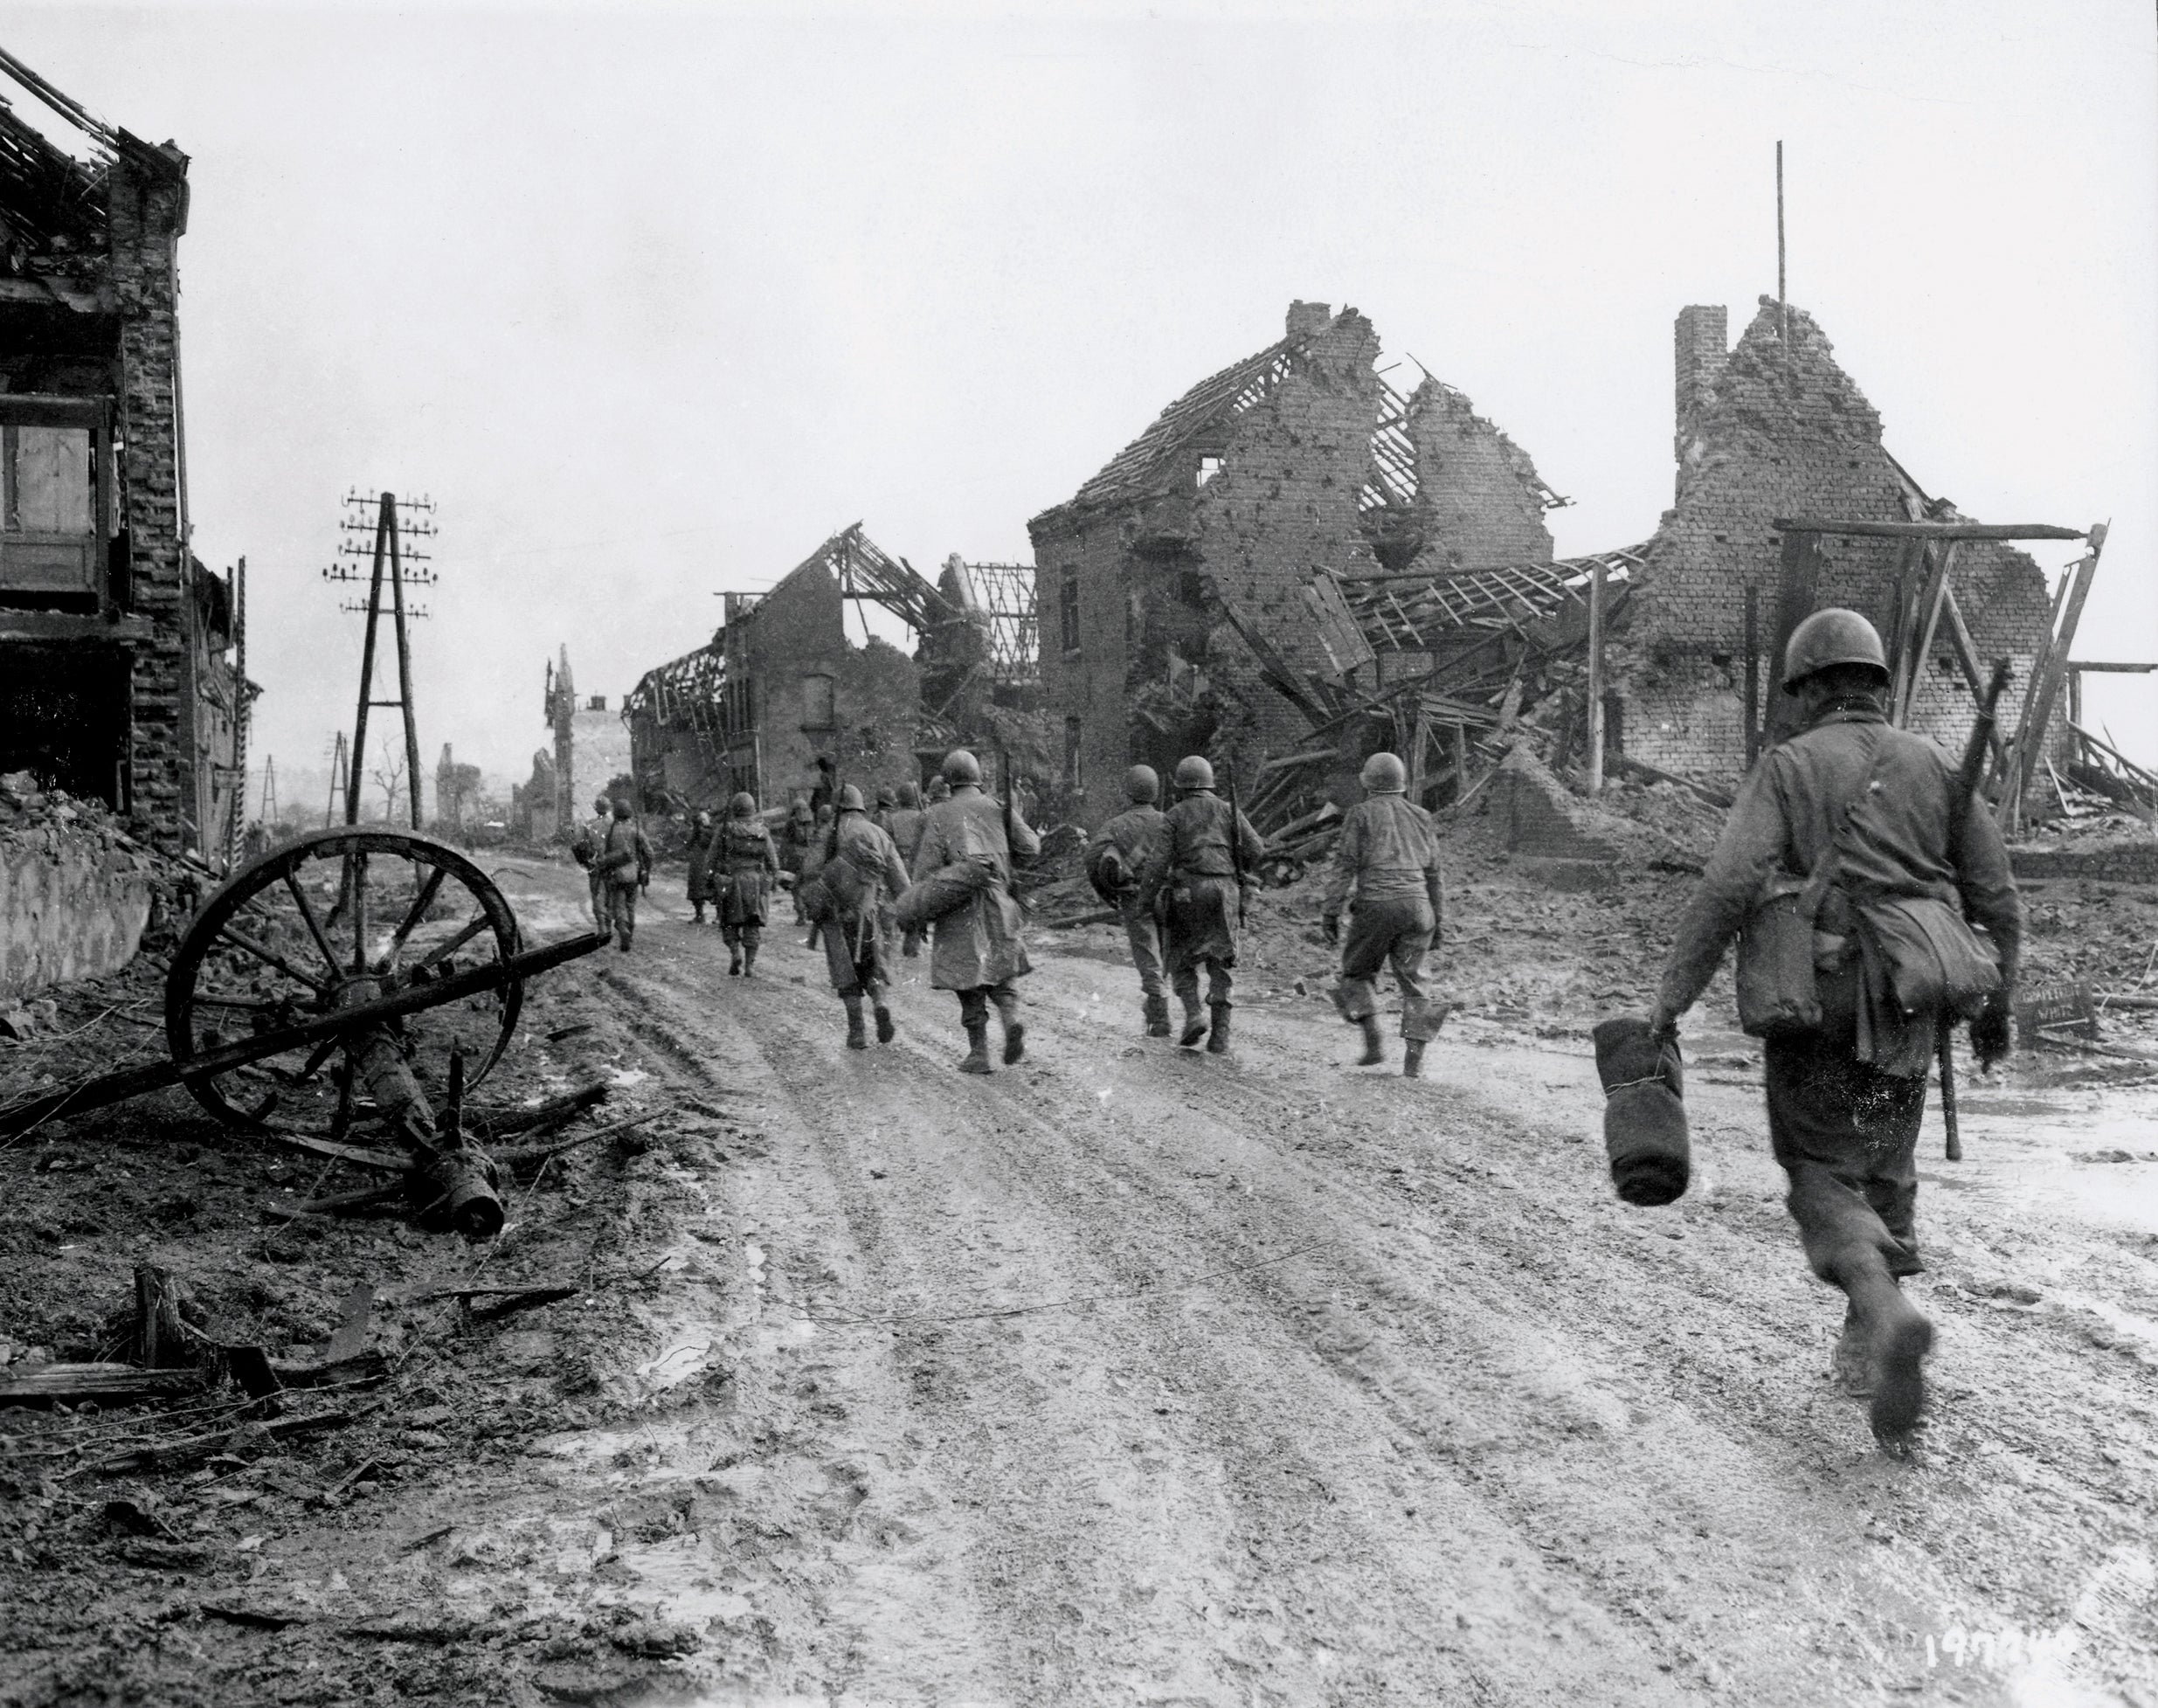 American infantrymen move through Hurtgen, Germany, in December 1944. (Credit: National Archives)